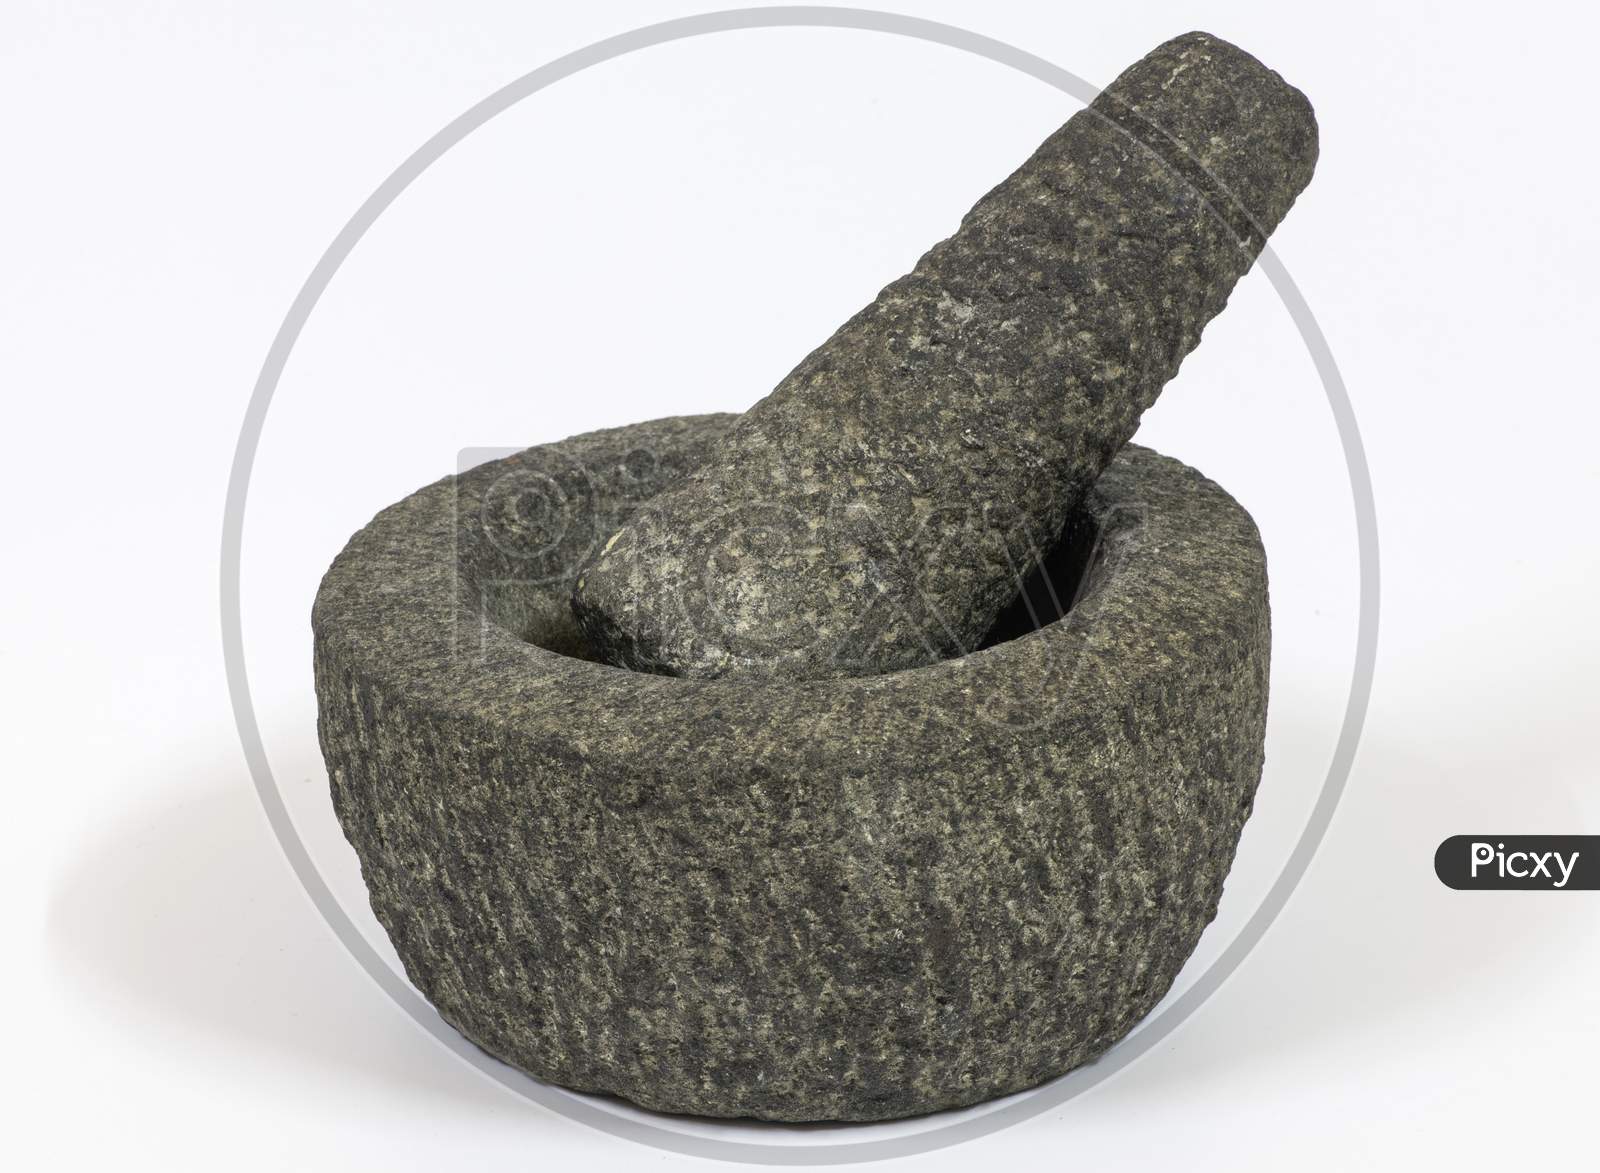 Stone Mortar And Pestle On A White Background